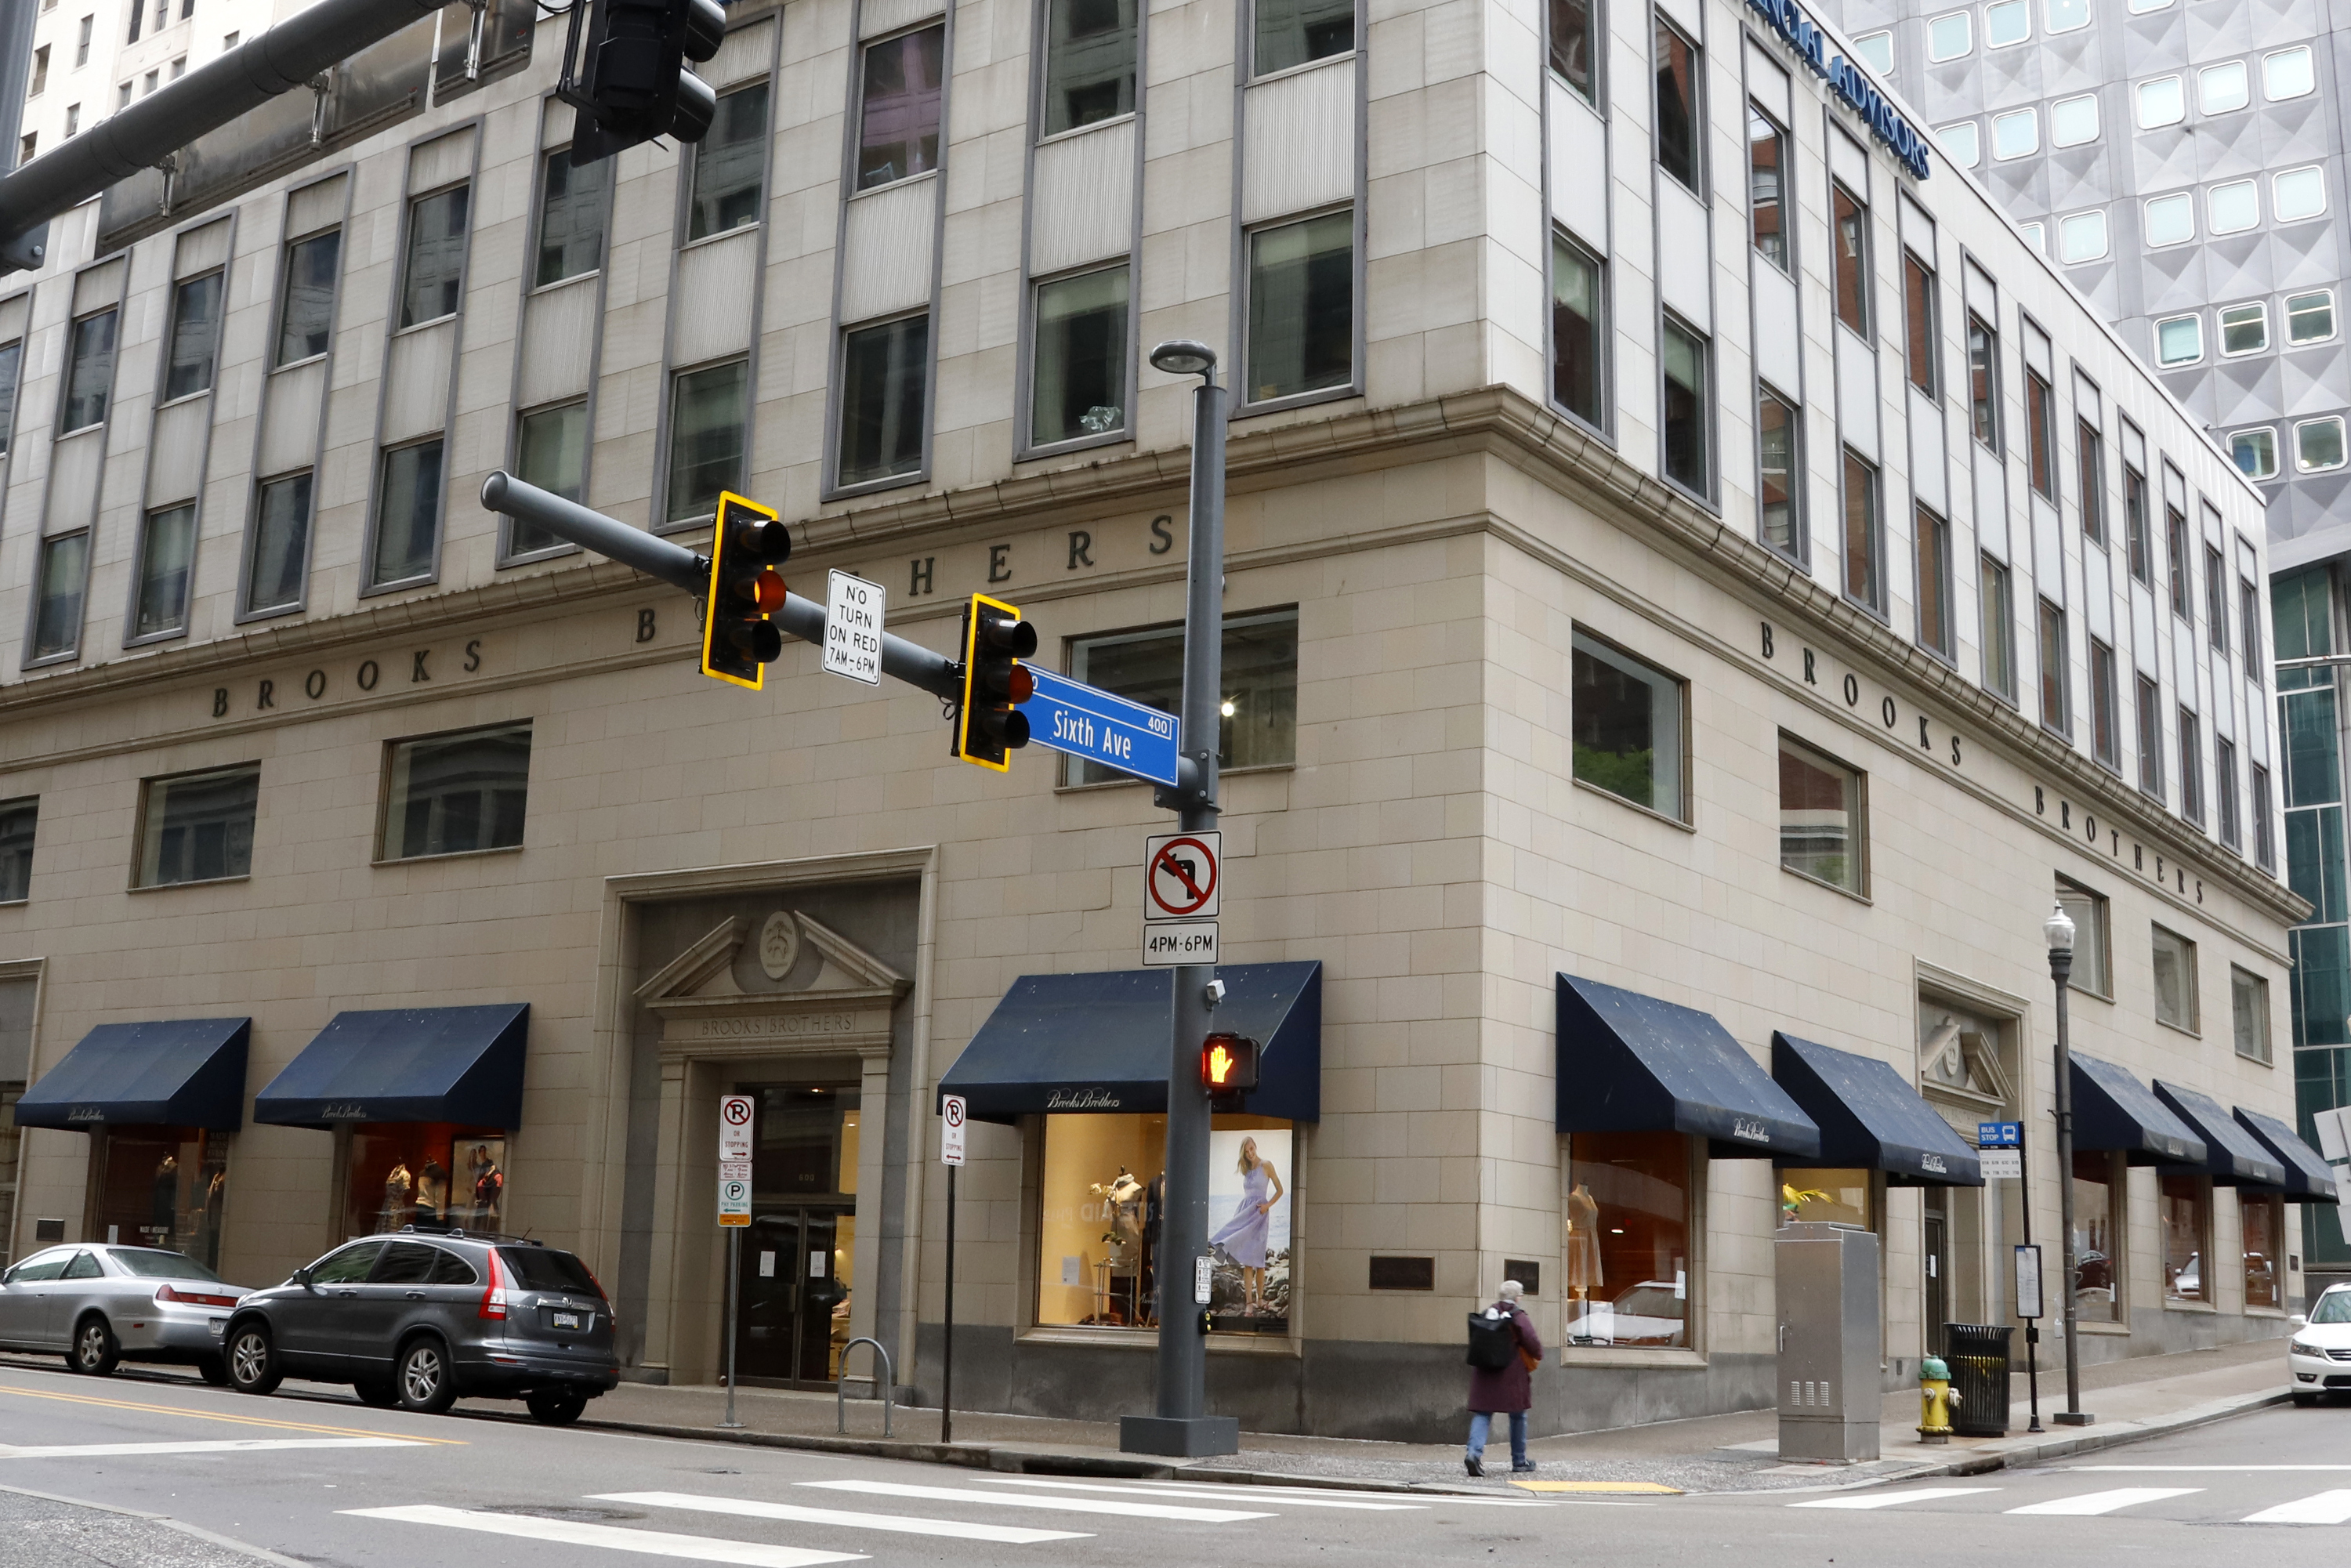 brooks brothers 6th ave